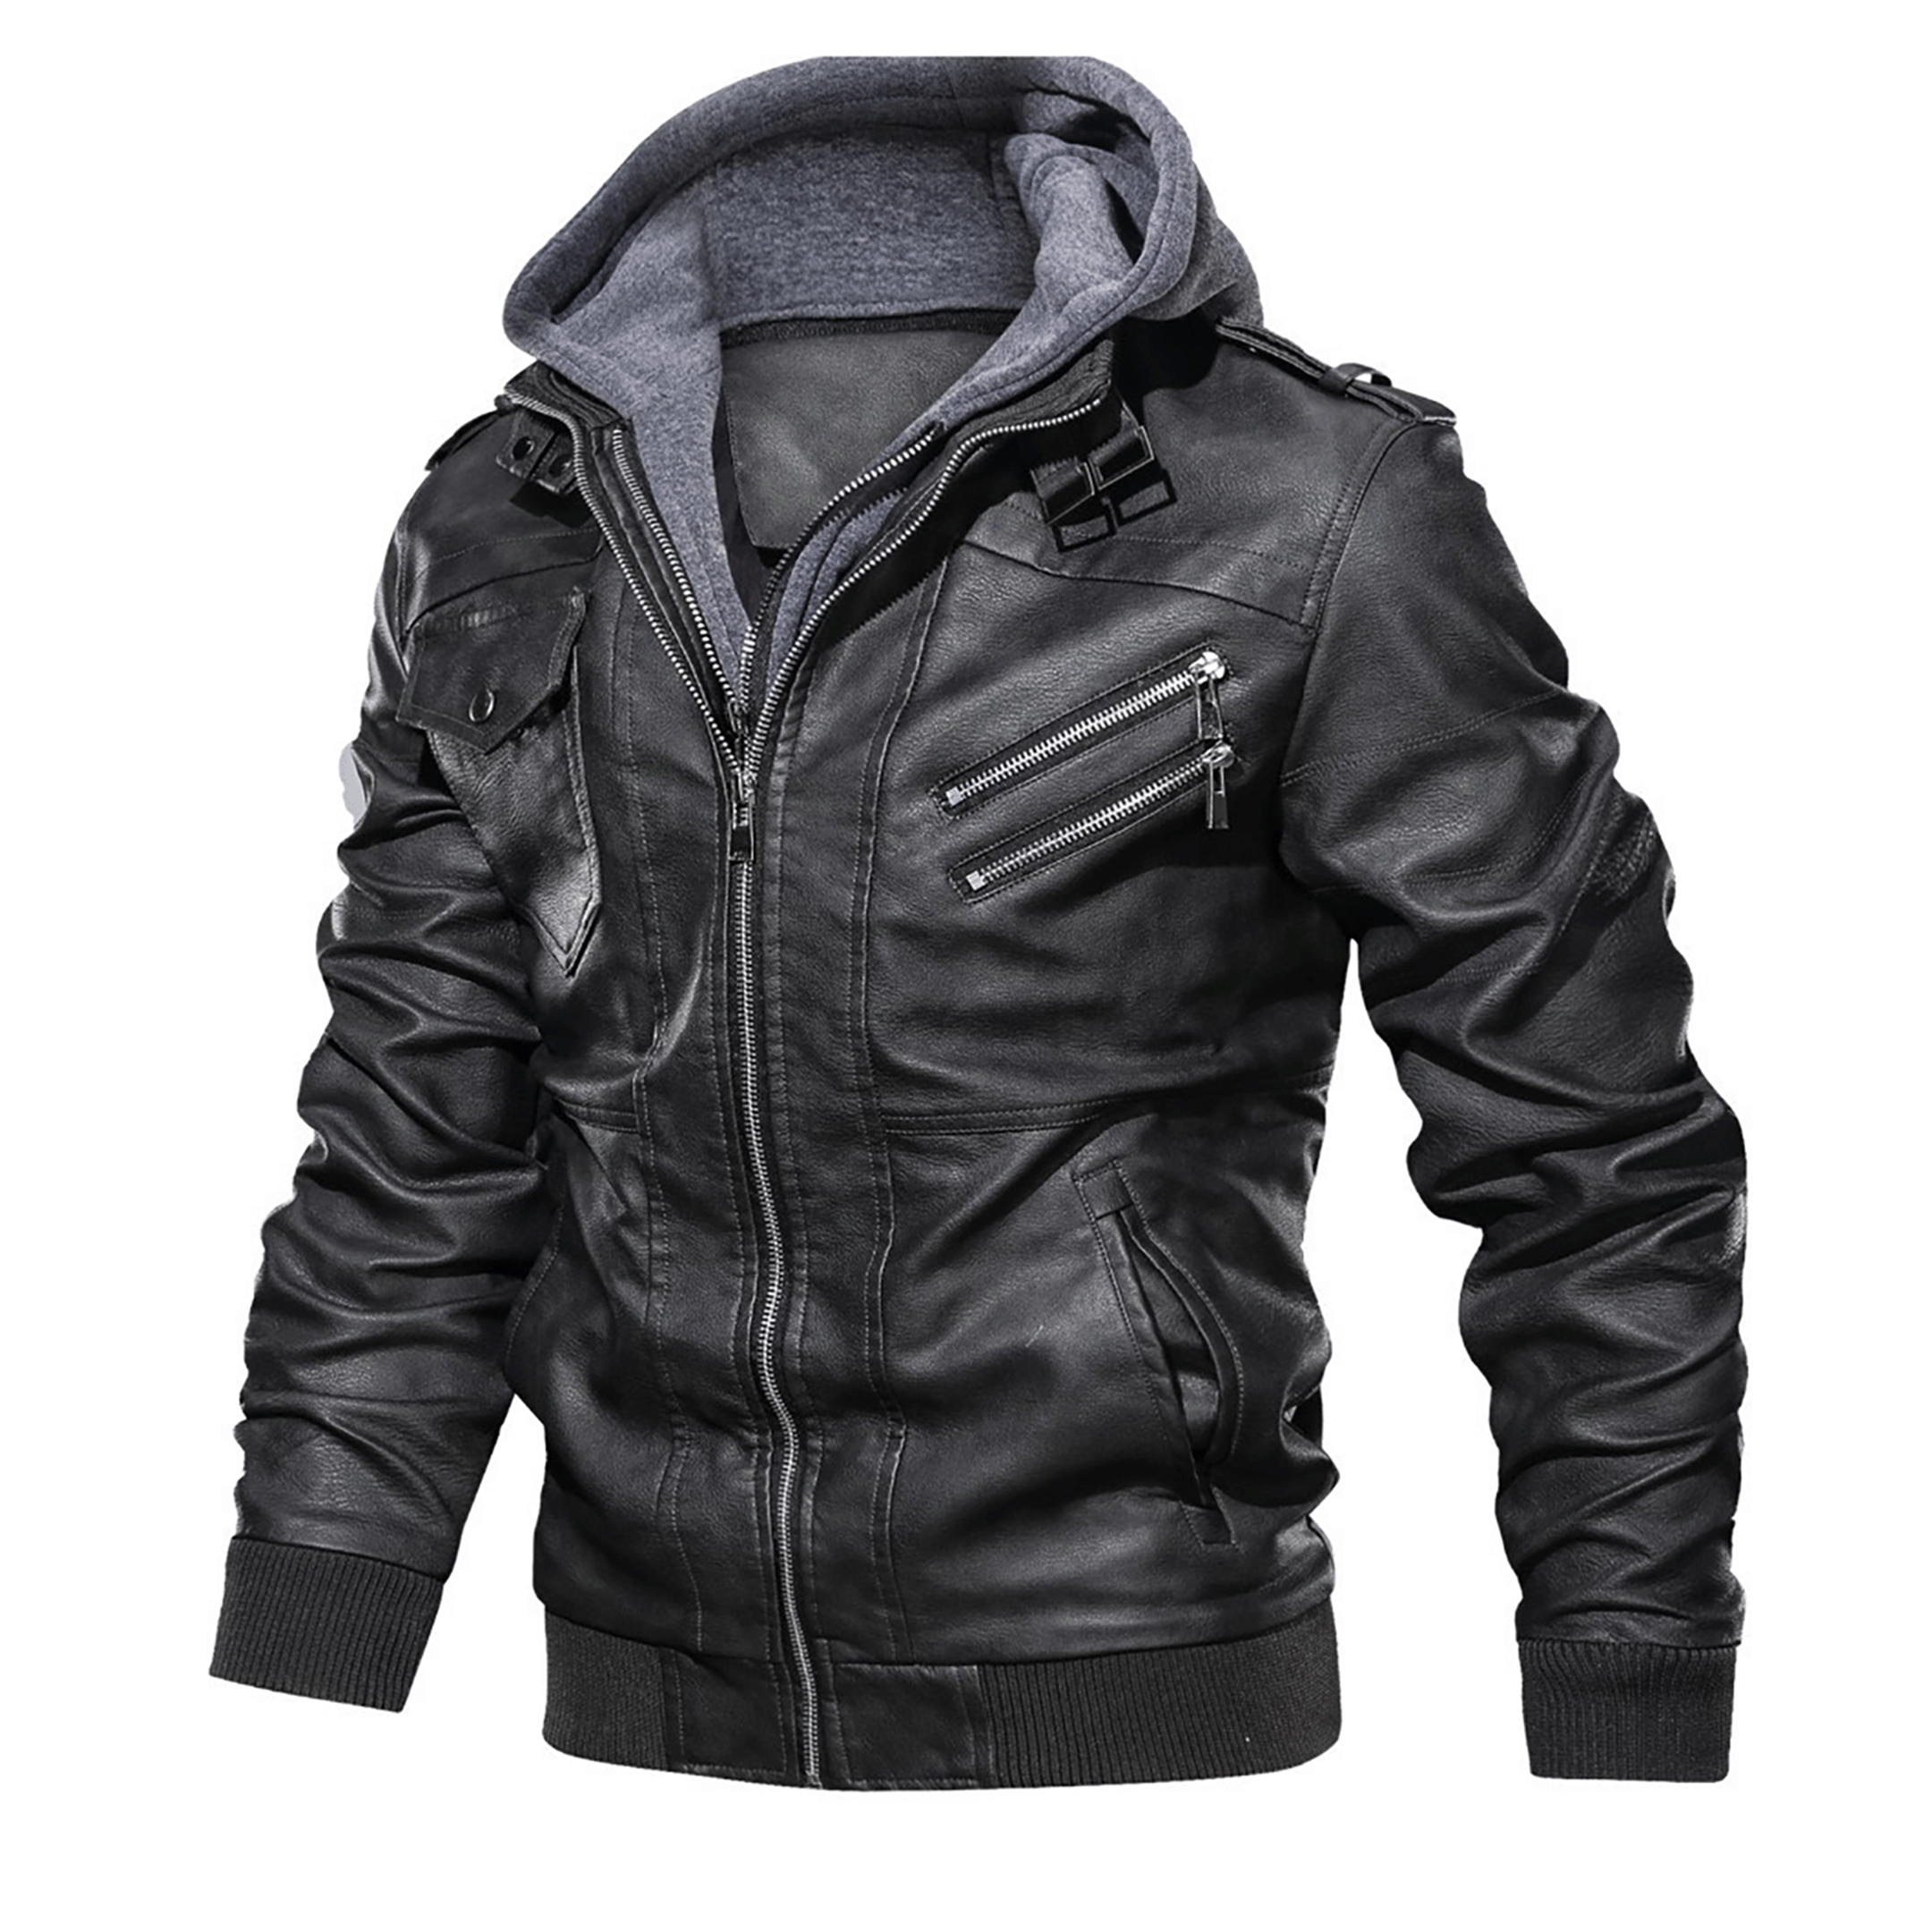 Top leather jackets and latest products 451